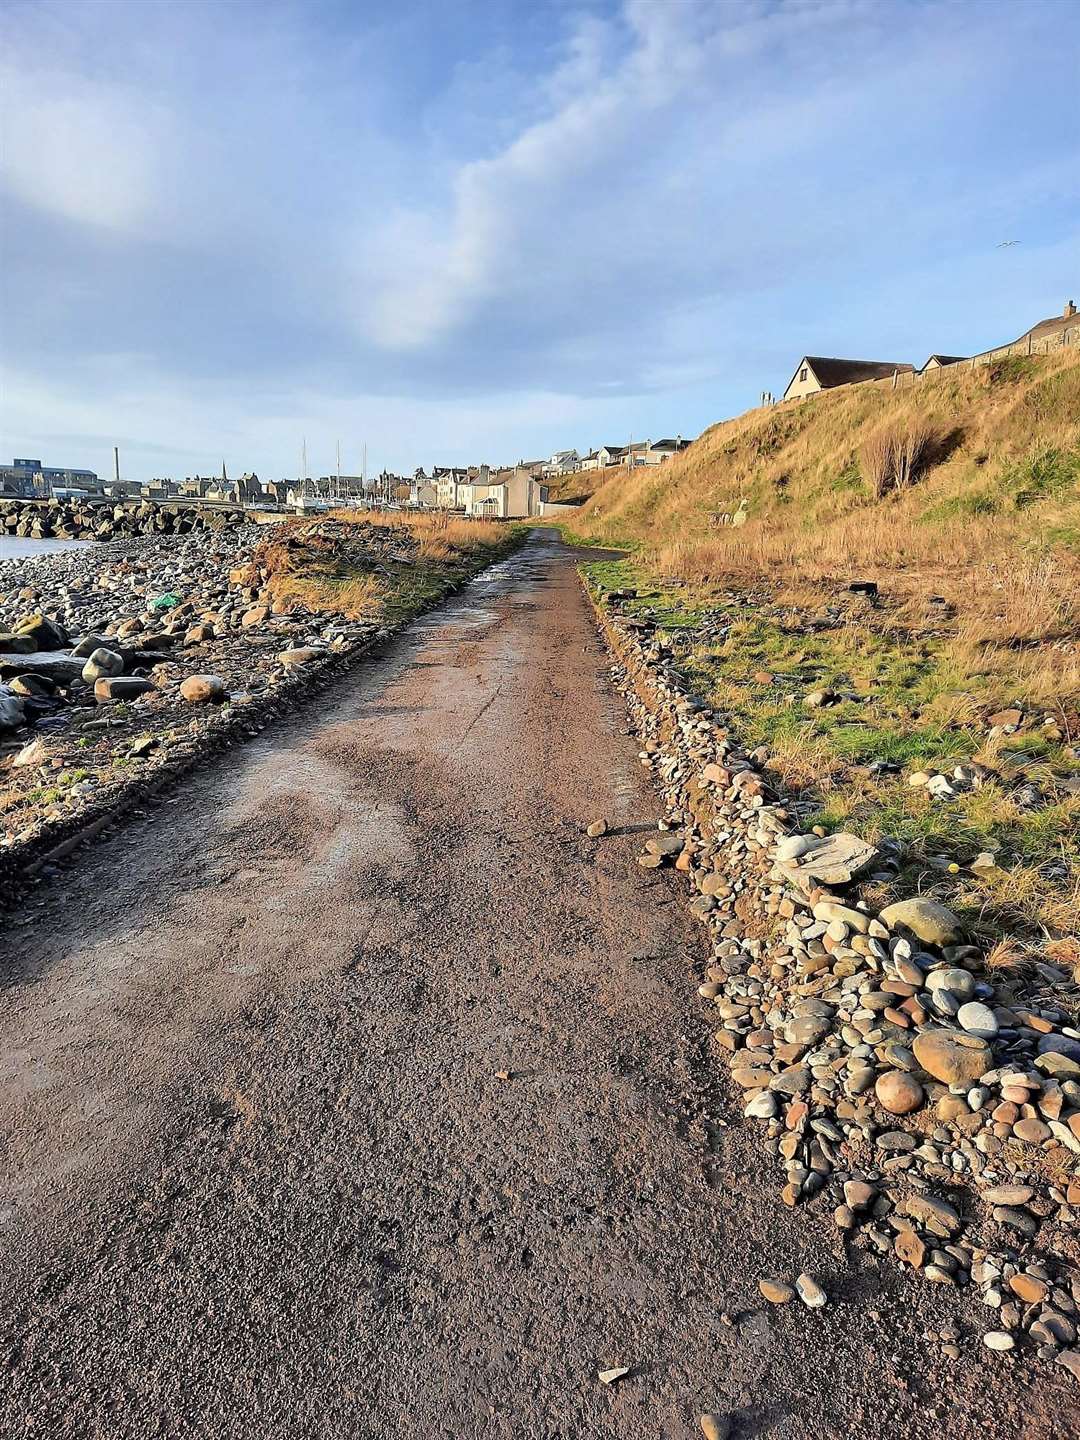 The road leading to North Baths was also cleared of boulders and rubbish left after last week's storm.